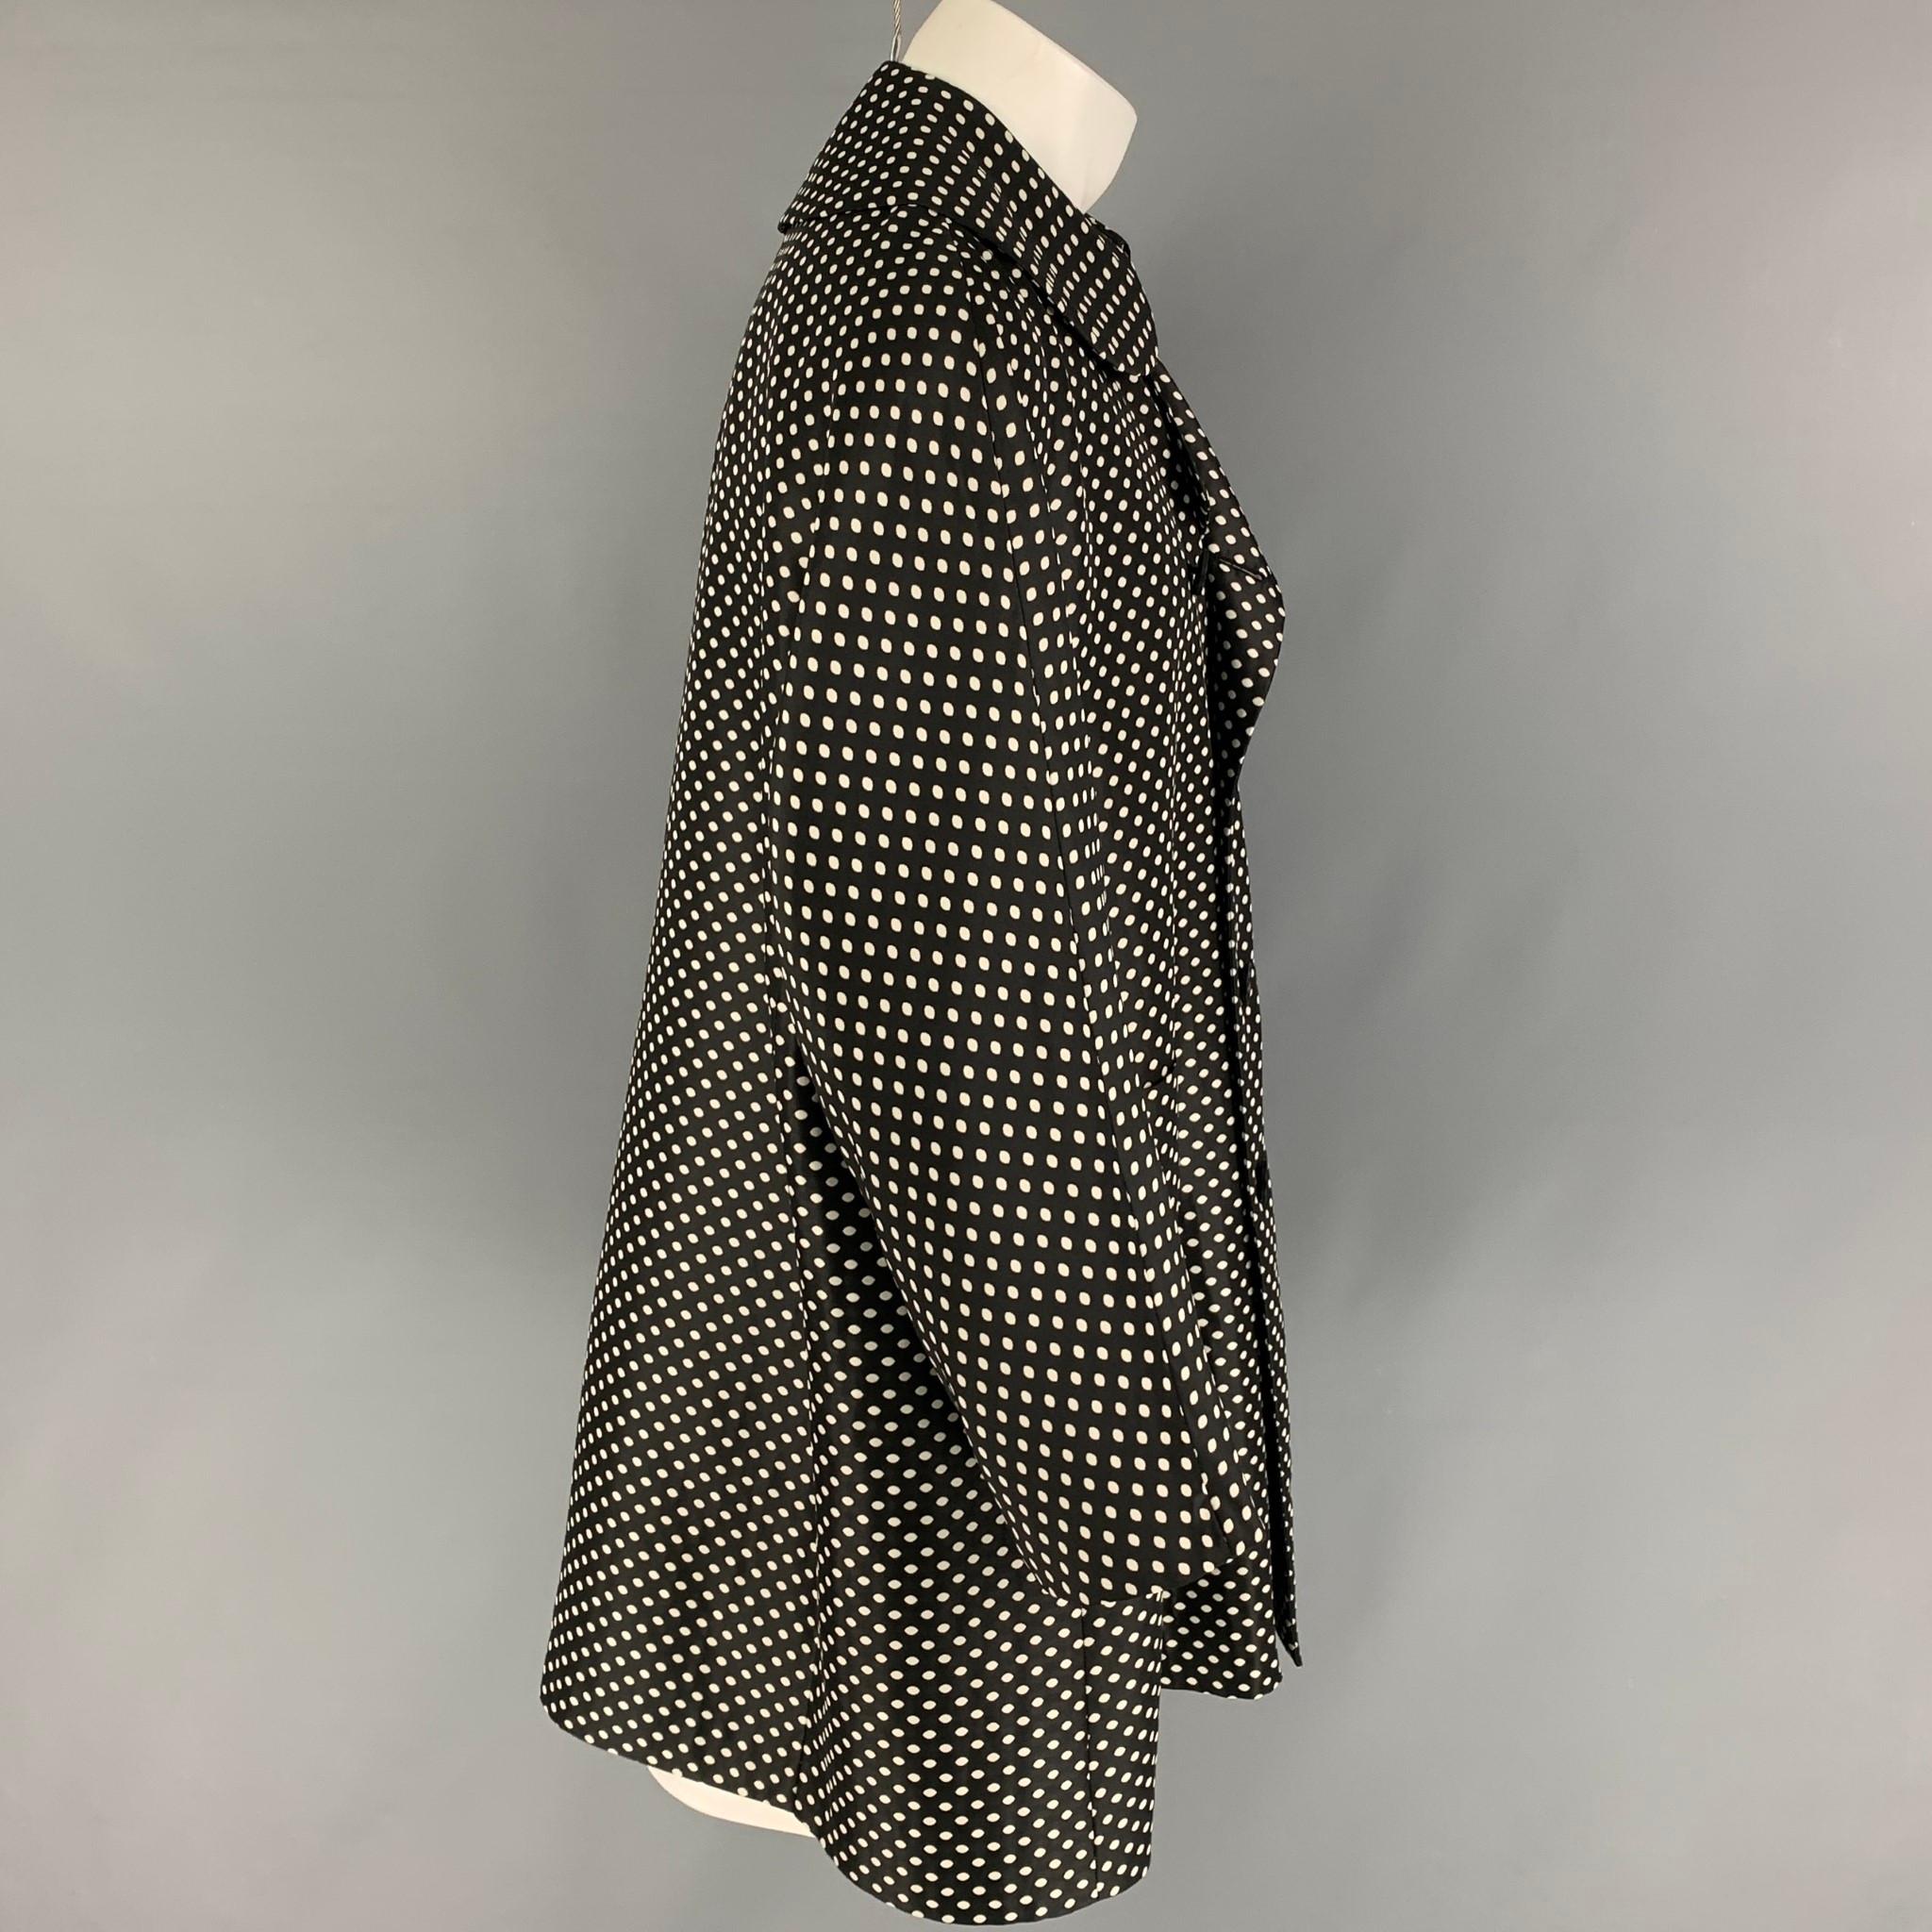 COMME des GARCONS HOMME PLUS coat comes in a black & white polka dot polyester featuring a oversized fit, patch pockets, and a double breasted closure. Made in Japan. 

Very Good Pre-Owned Condition. Light discoloration at lapel.
Marked: